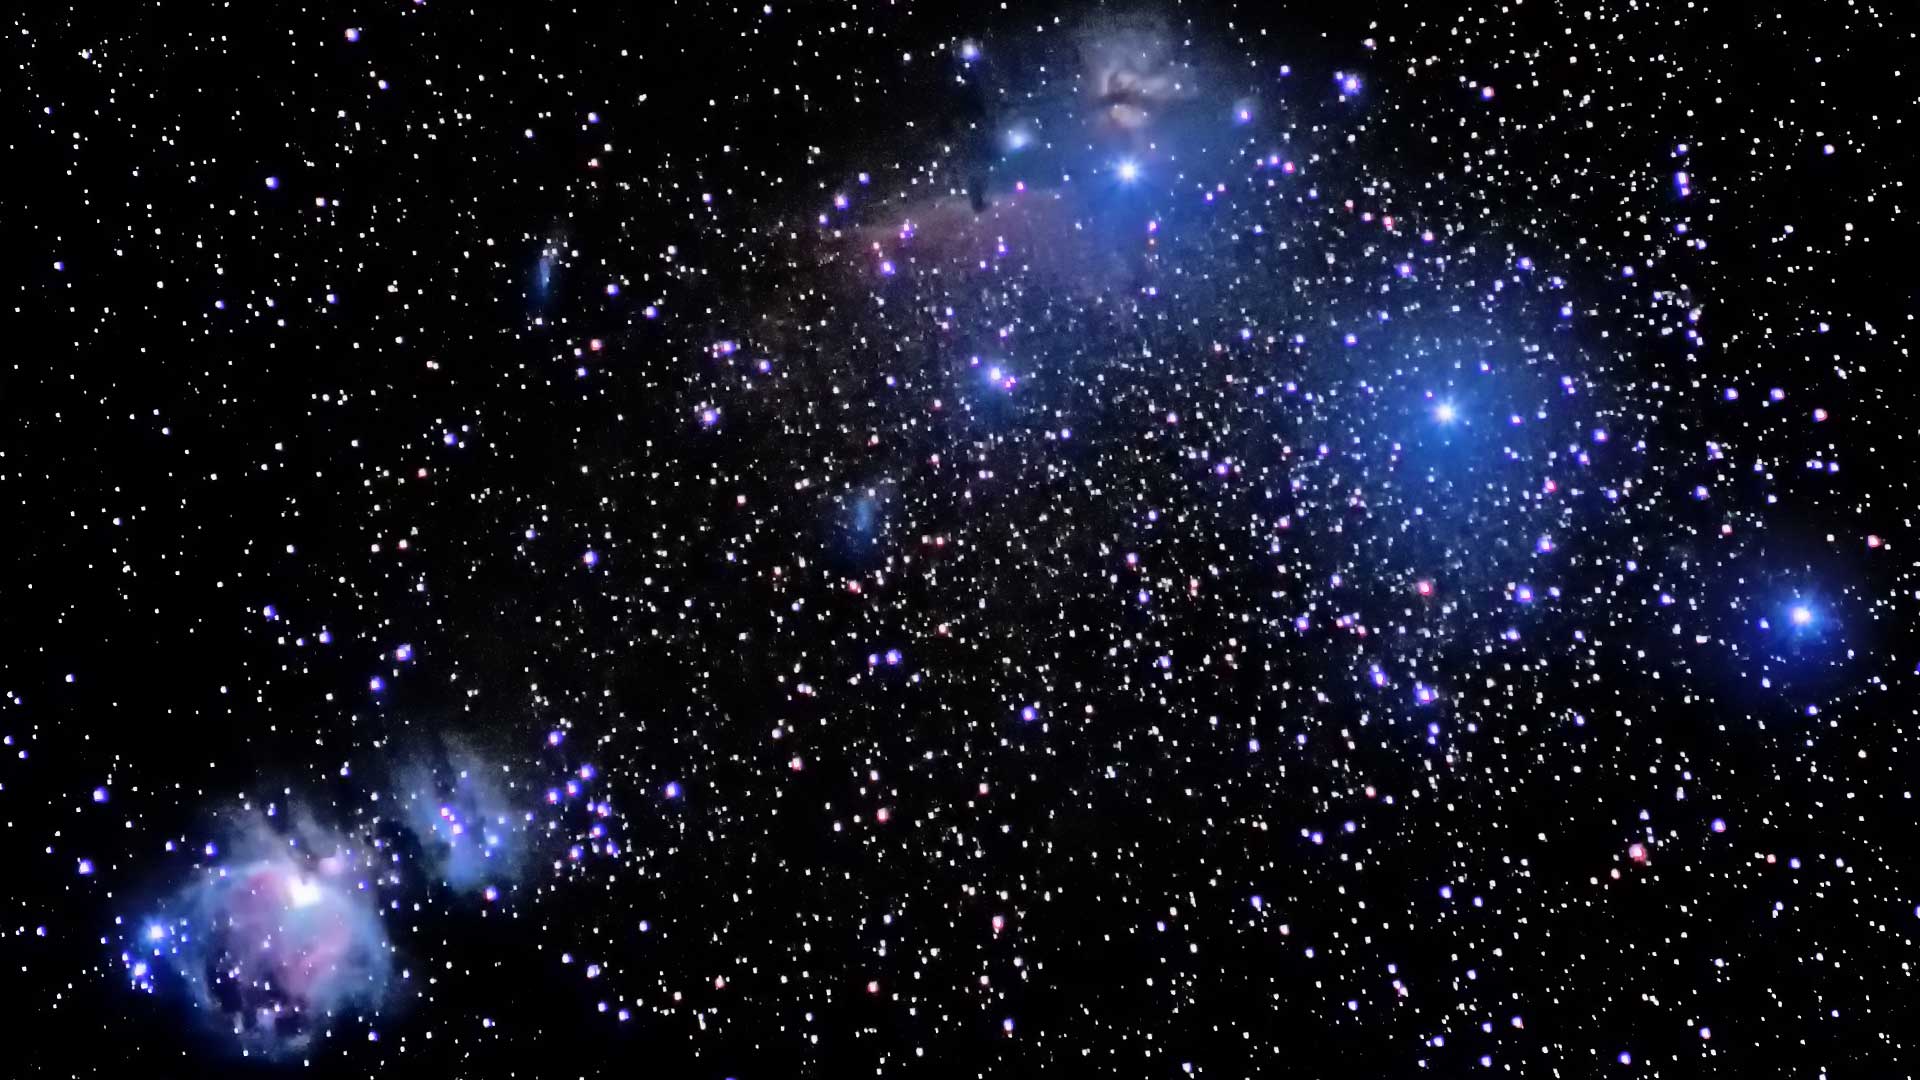 Photograph of Orion's sword constellation